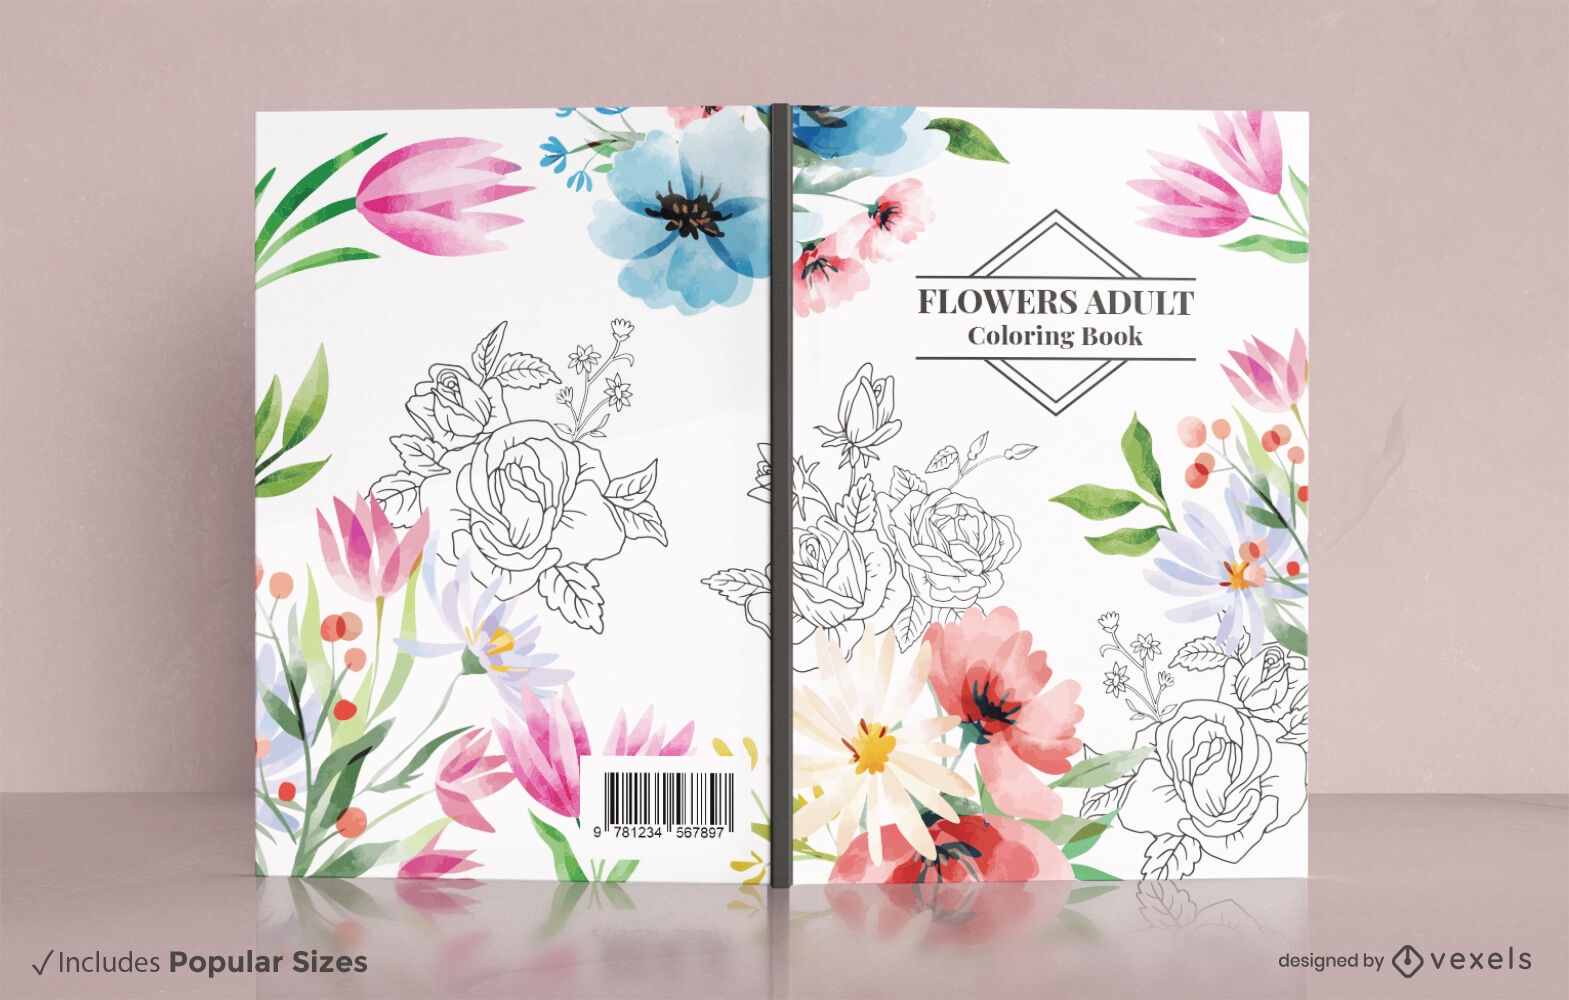 Flowers adult coloring book cover design